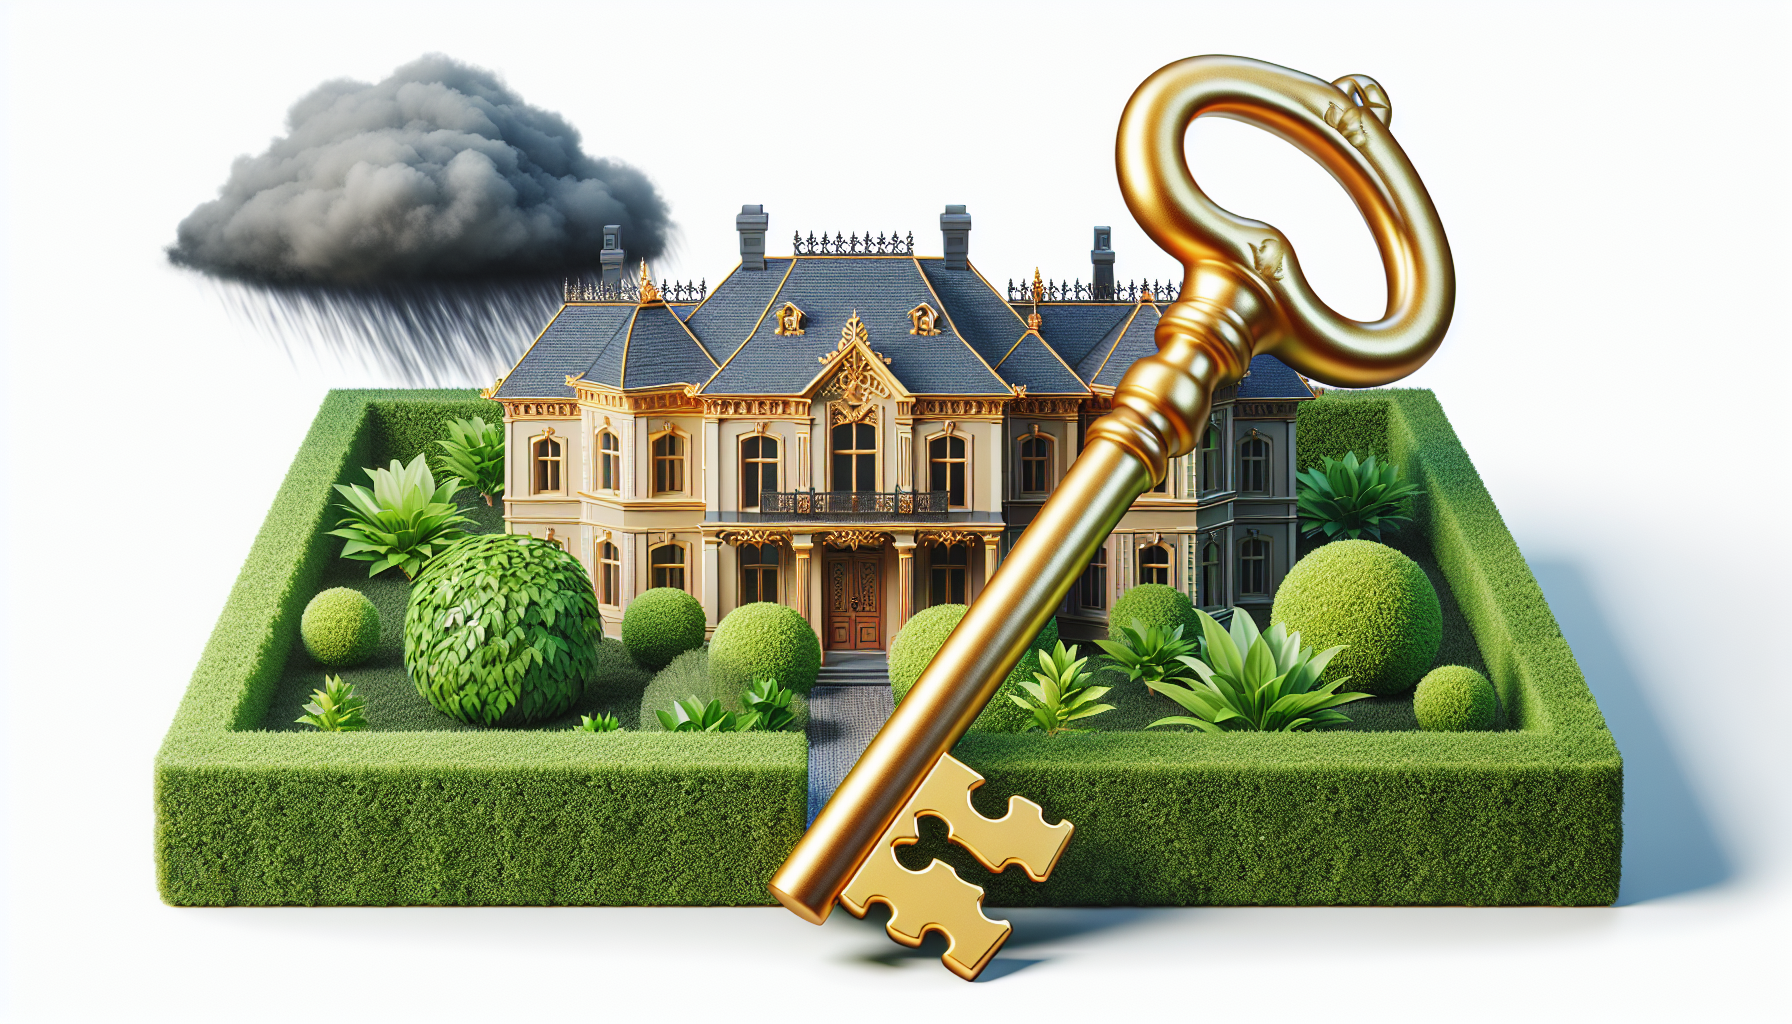 Incorporating trusts into estate planning